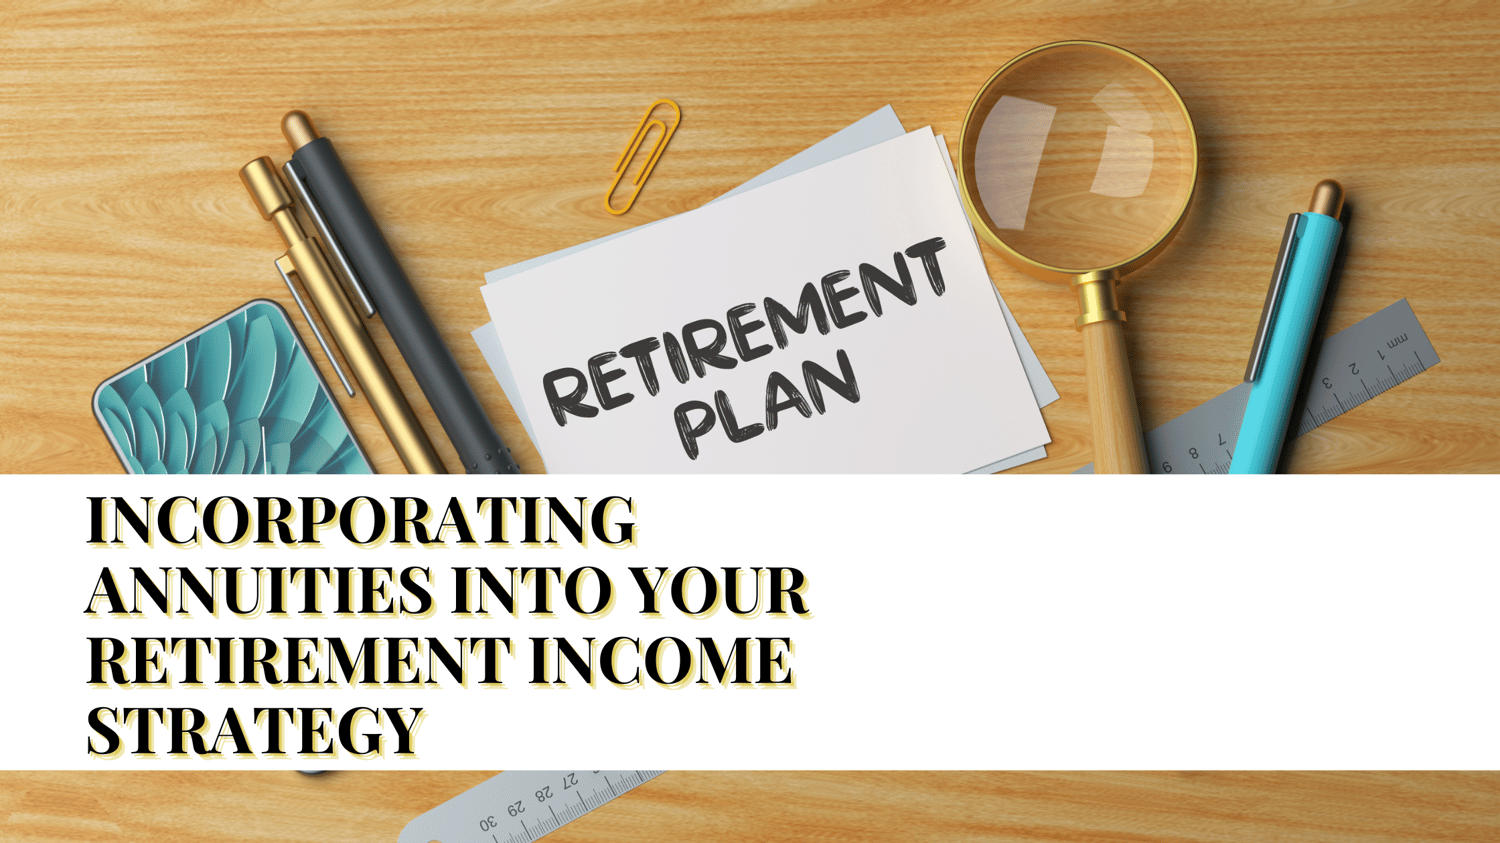 INCORPORATING ANNUITIES INTO YOUR RETIREMENT INCOME STRATEGY